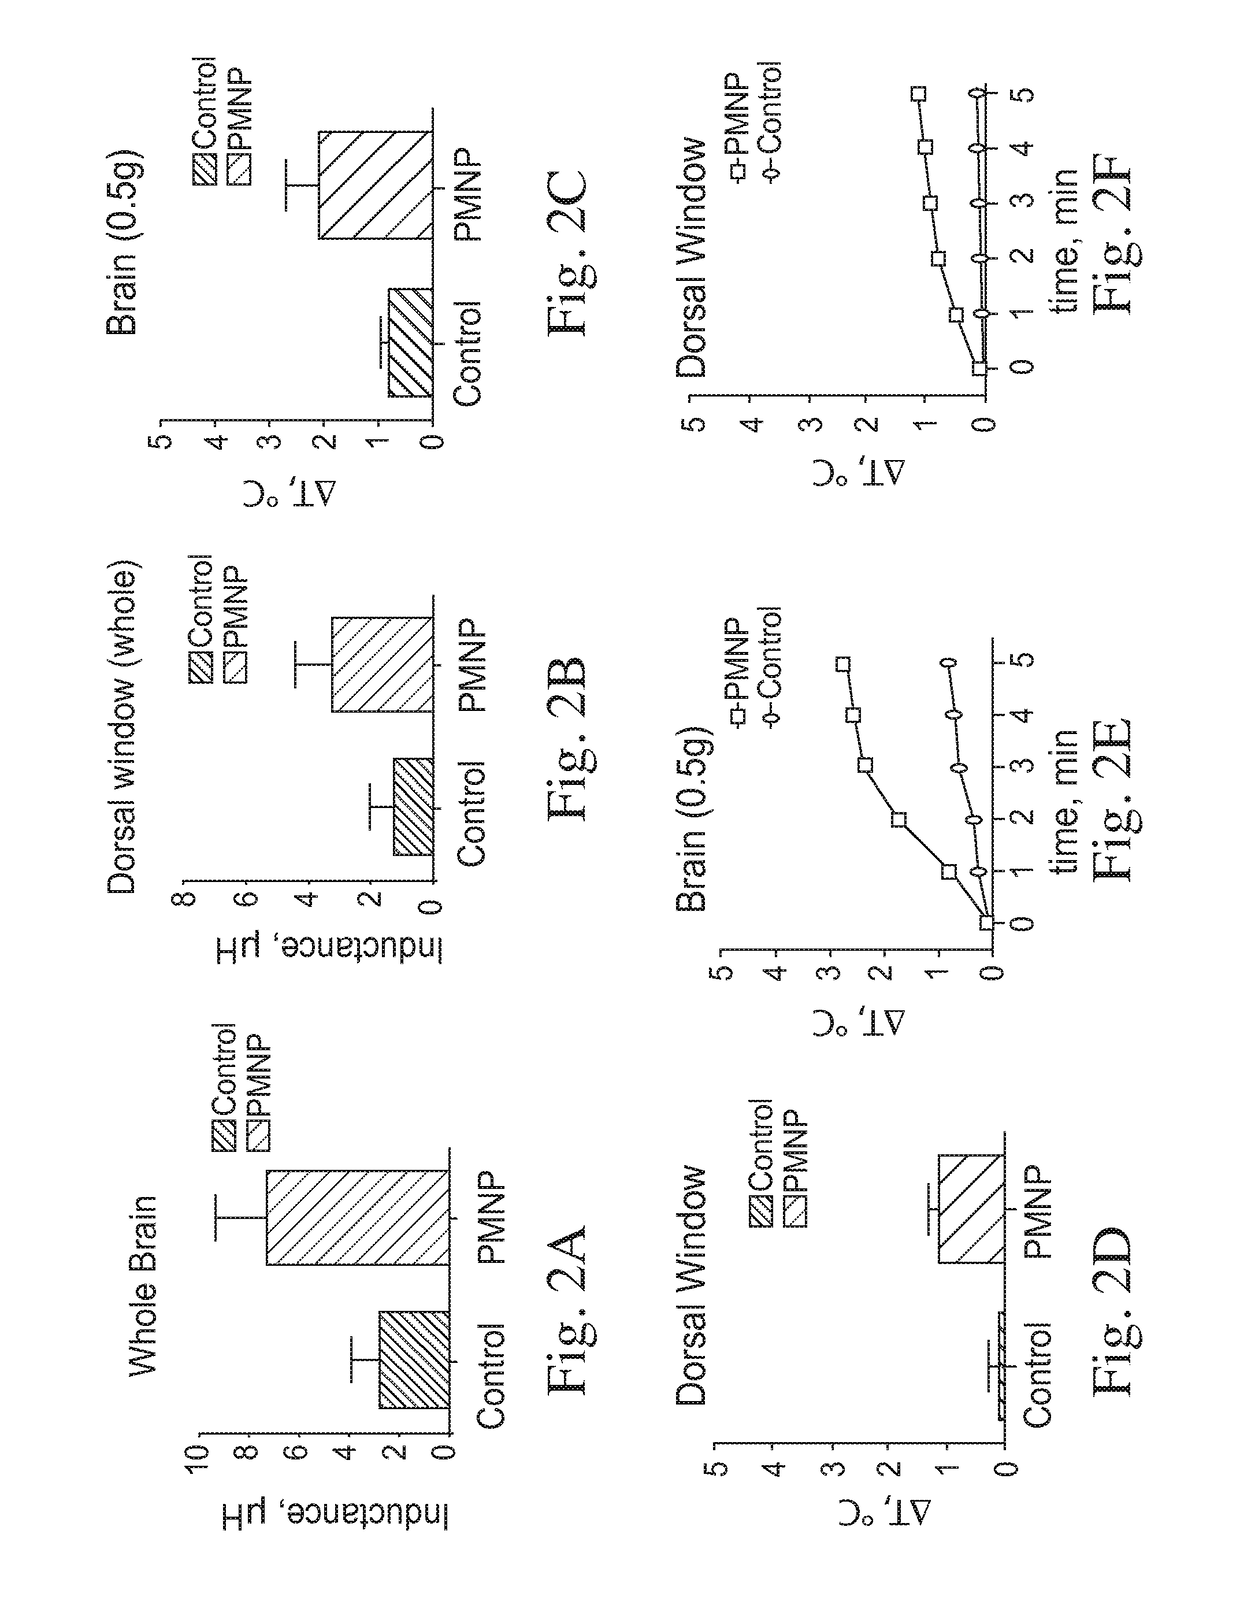 Modified paramagnetic nanoparticles for targeted delivery of therapeutics and methods thereof